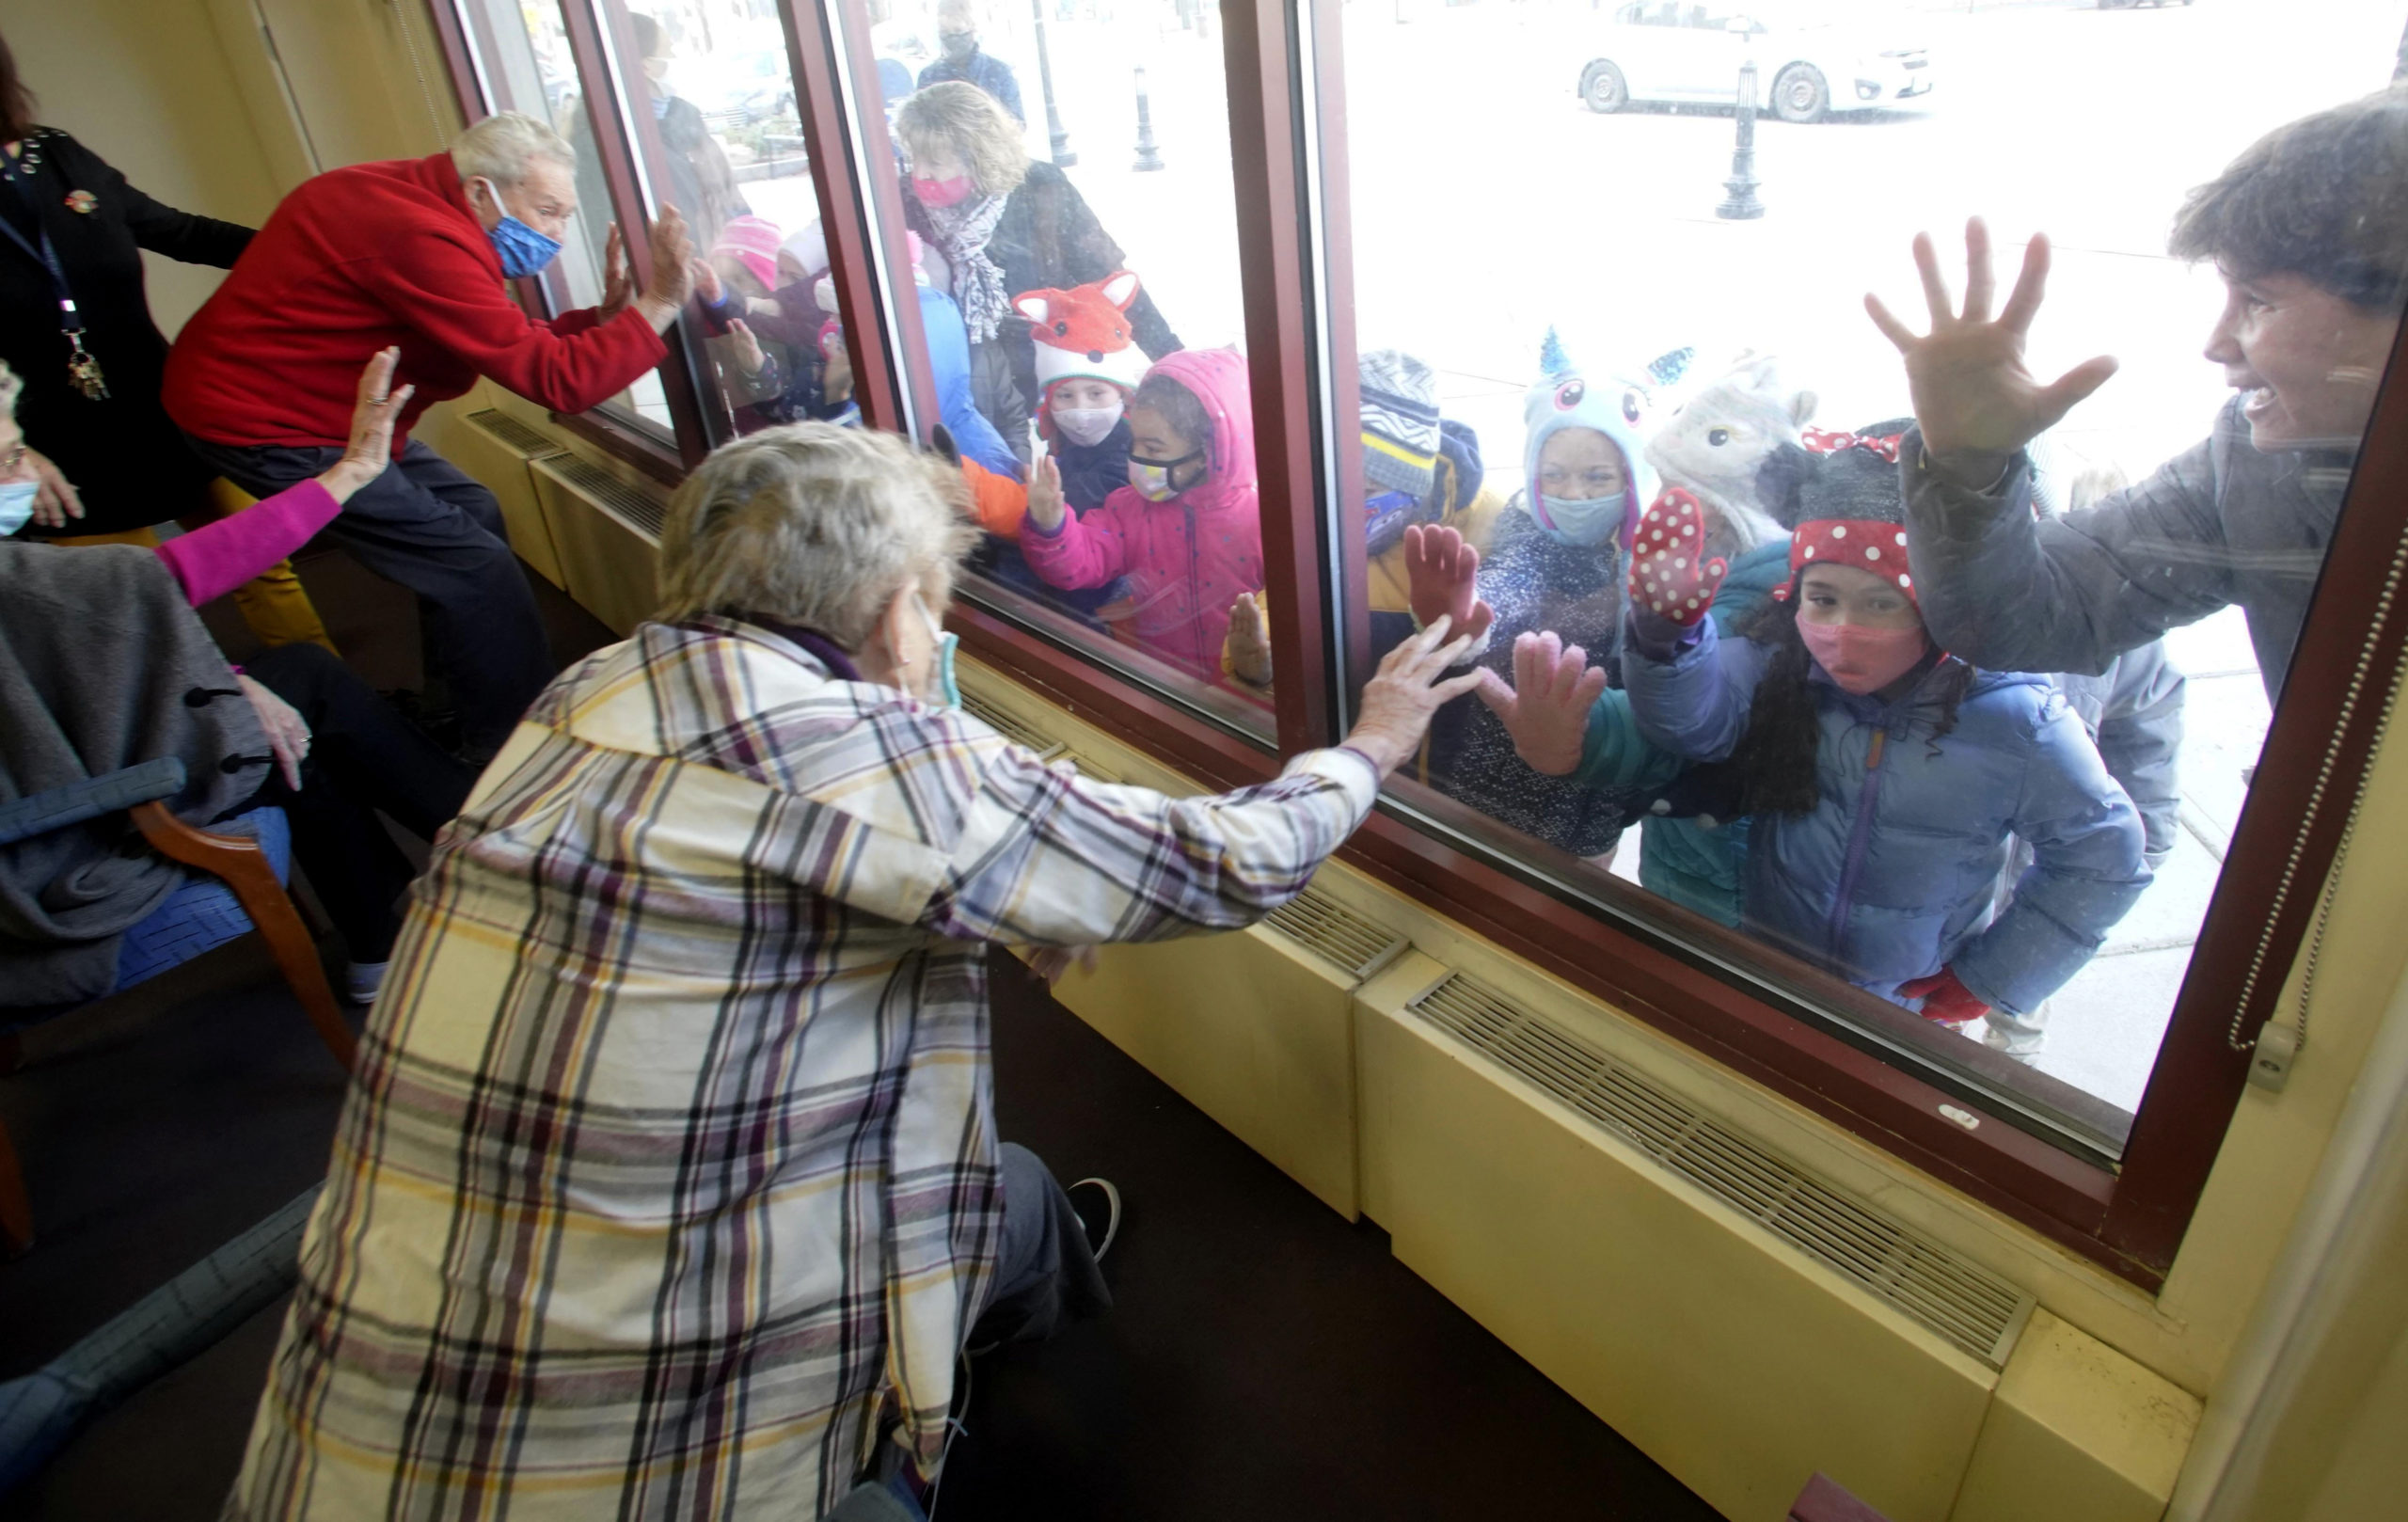 The pre-kindergarten group from the Boys and Girls Club visit through the window with members of the supportive daycare program at the Froio Senior Center in Pittsfield, Mass., in Nov. 2020 